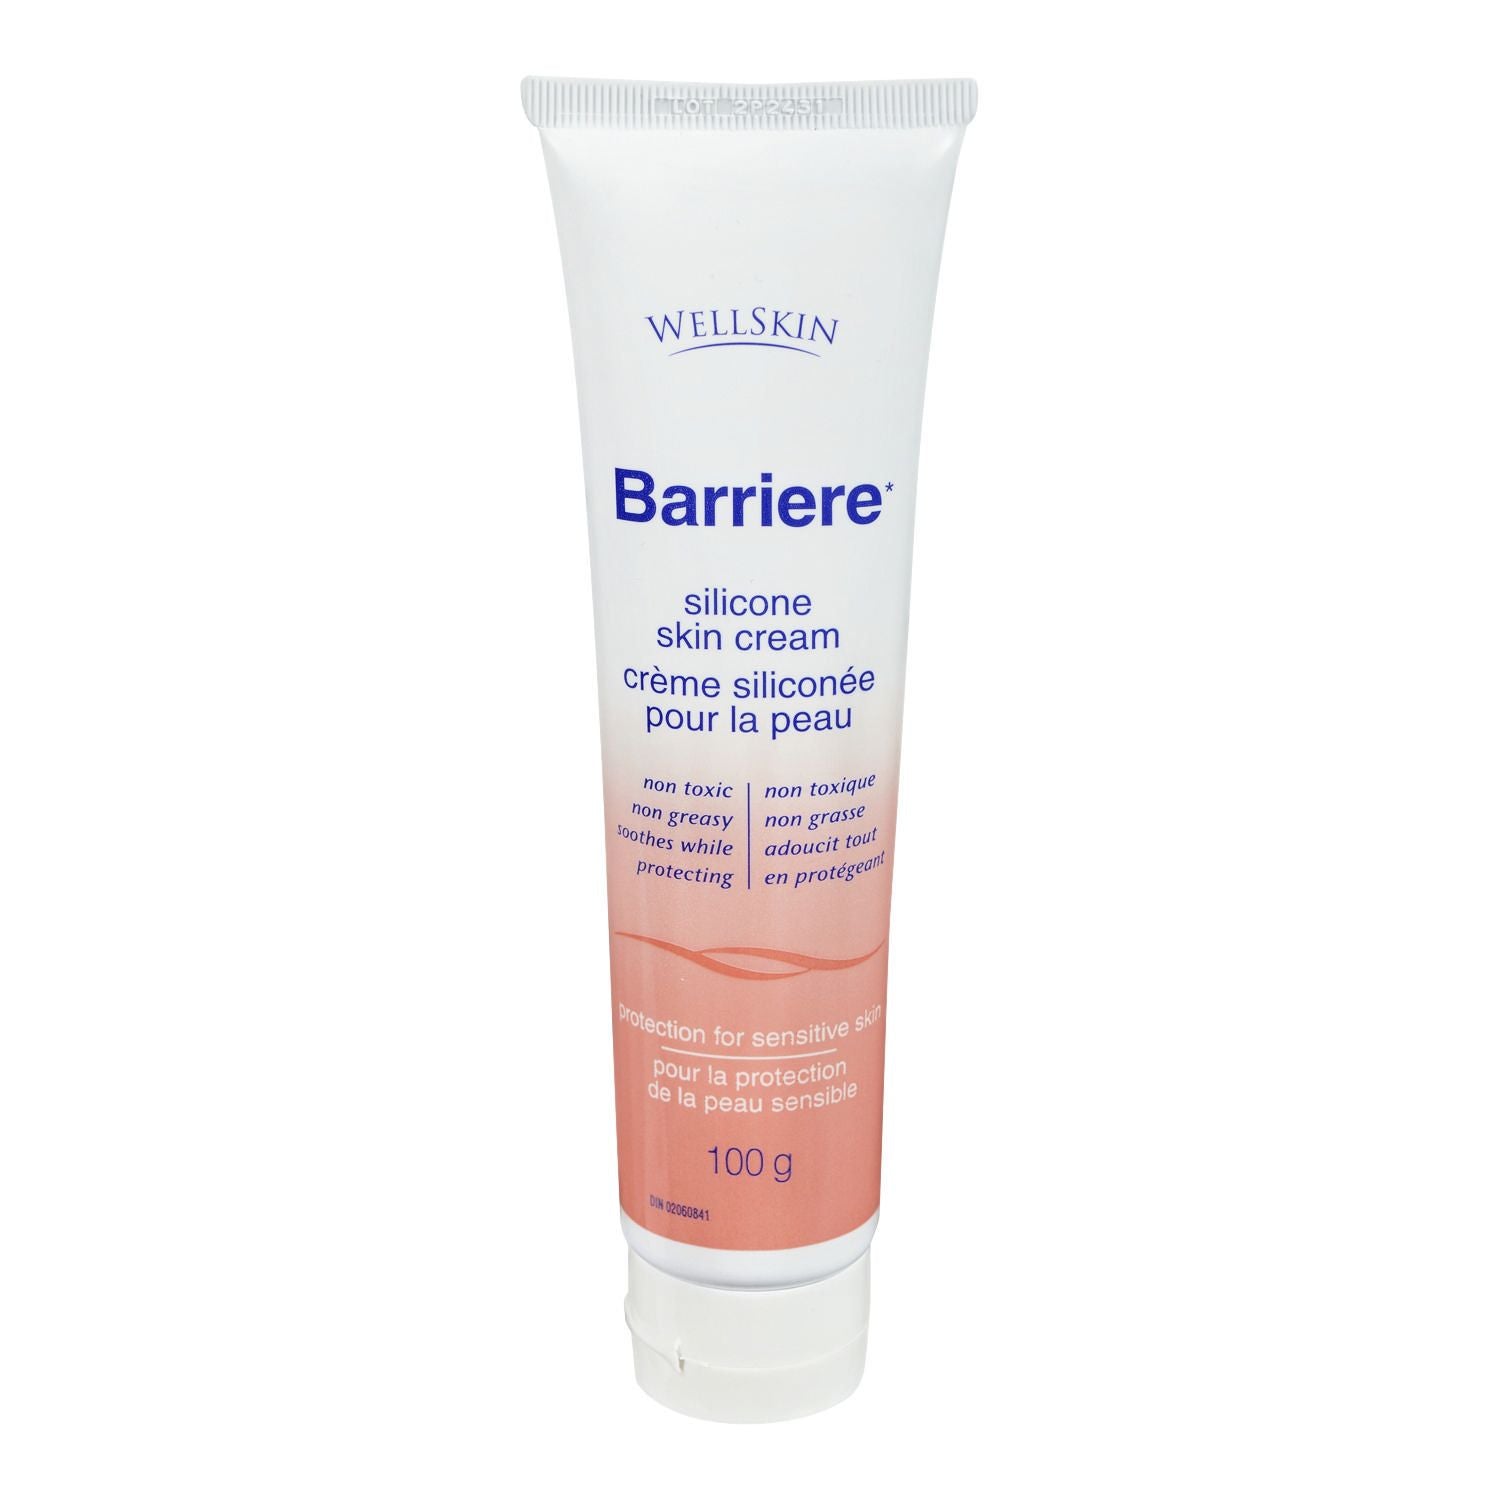 Well Spring Barriere Silicone Skin Cream 100g